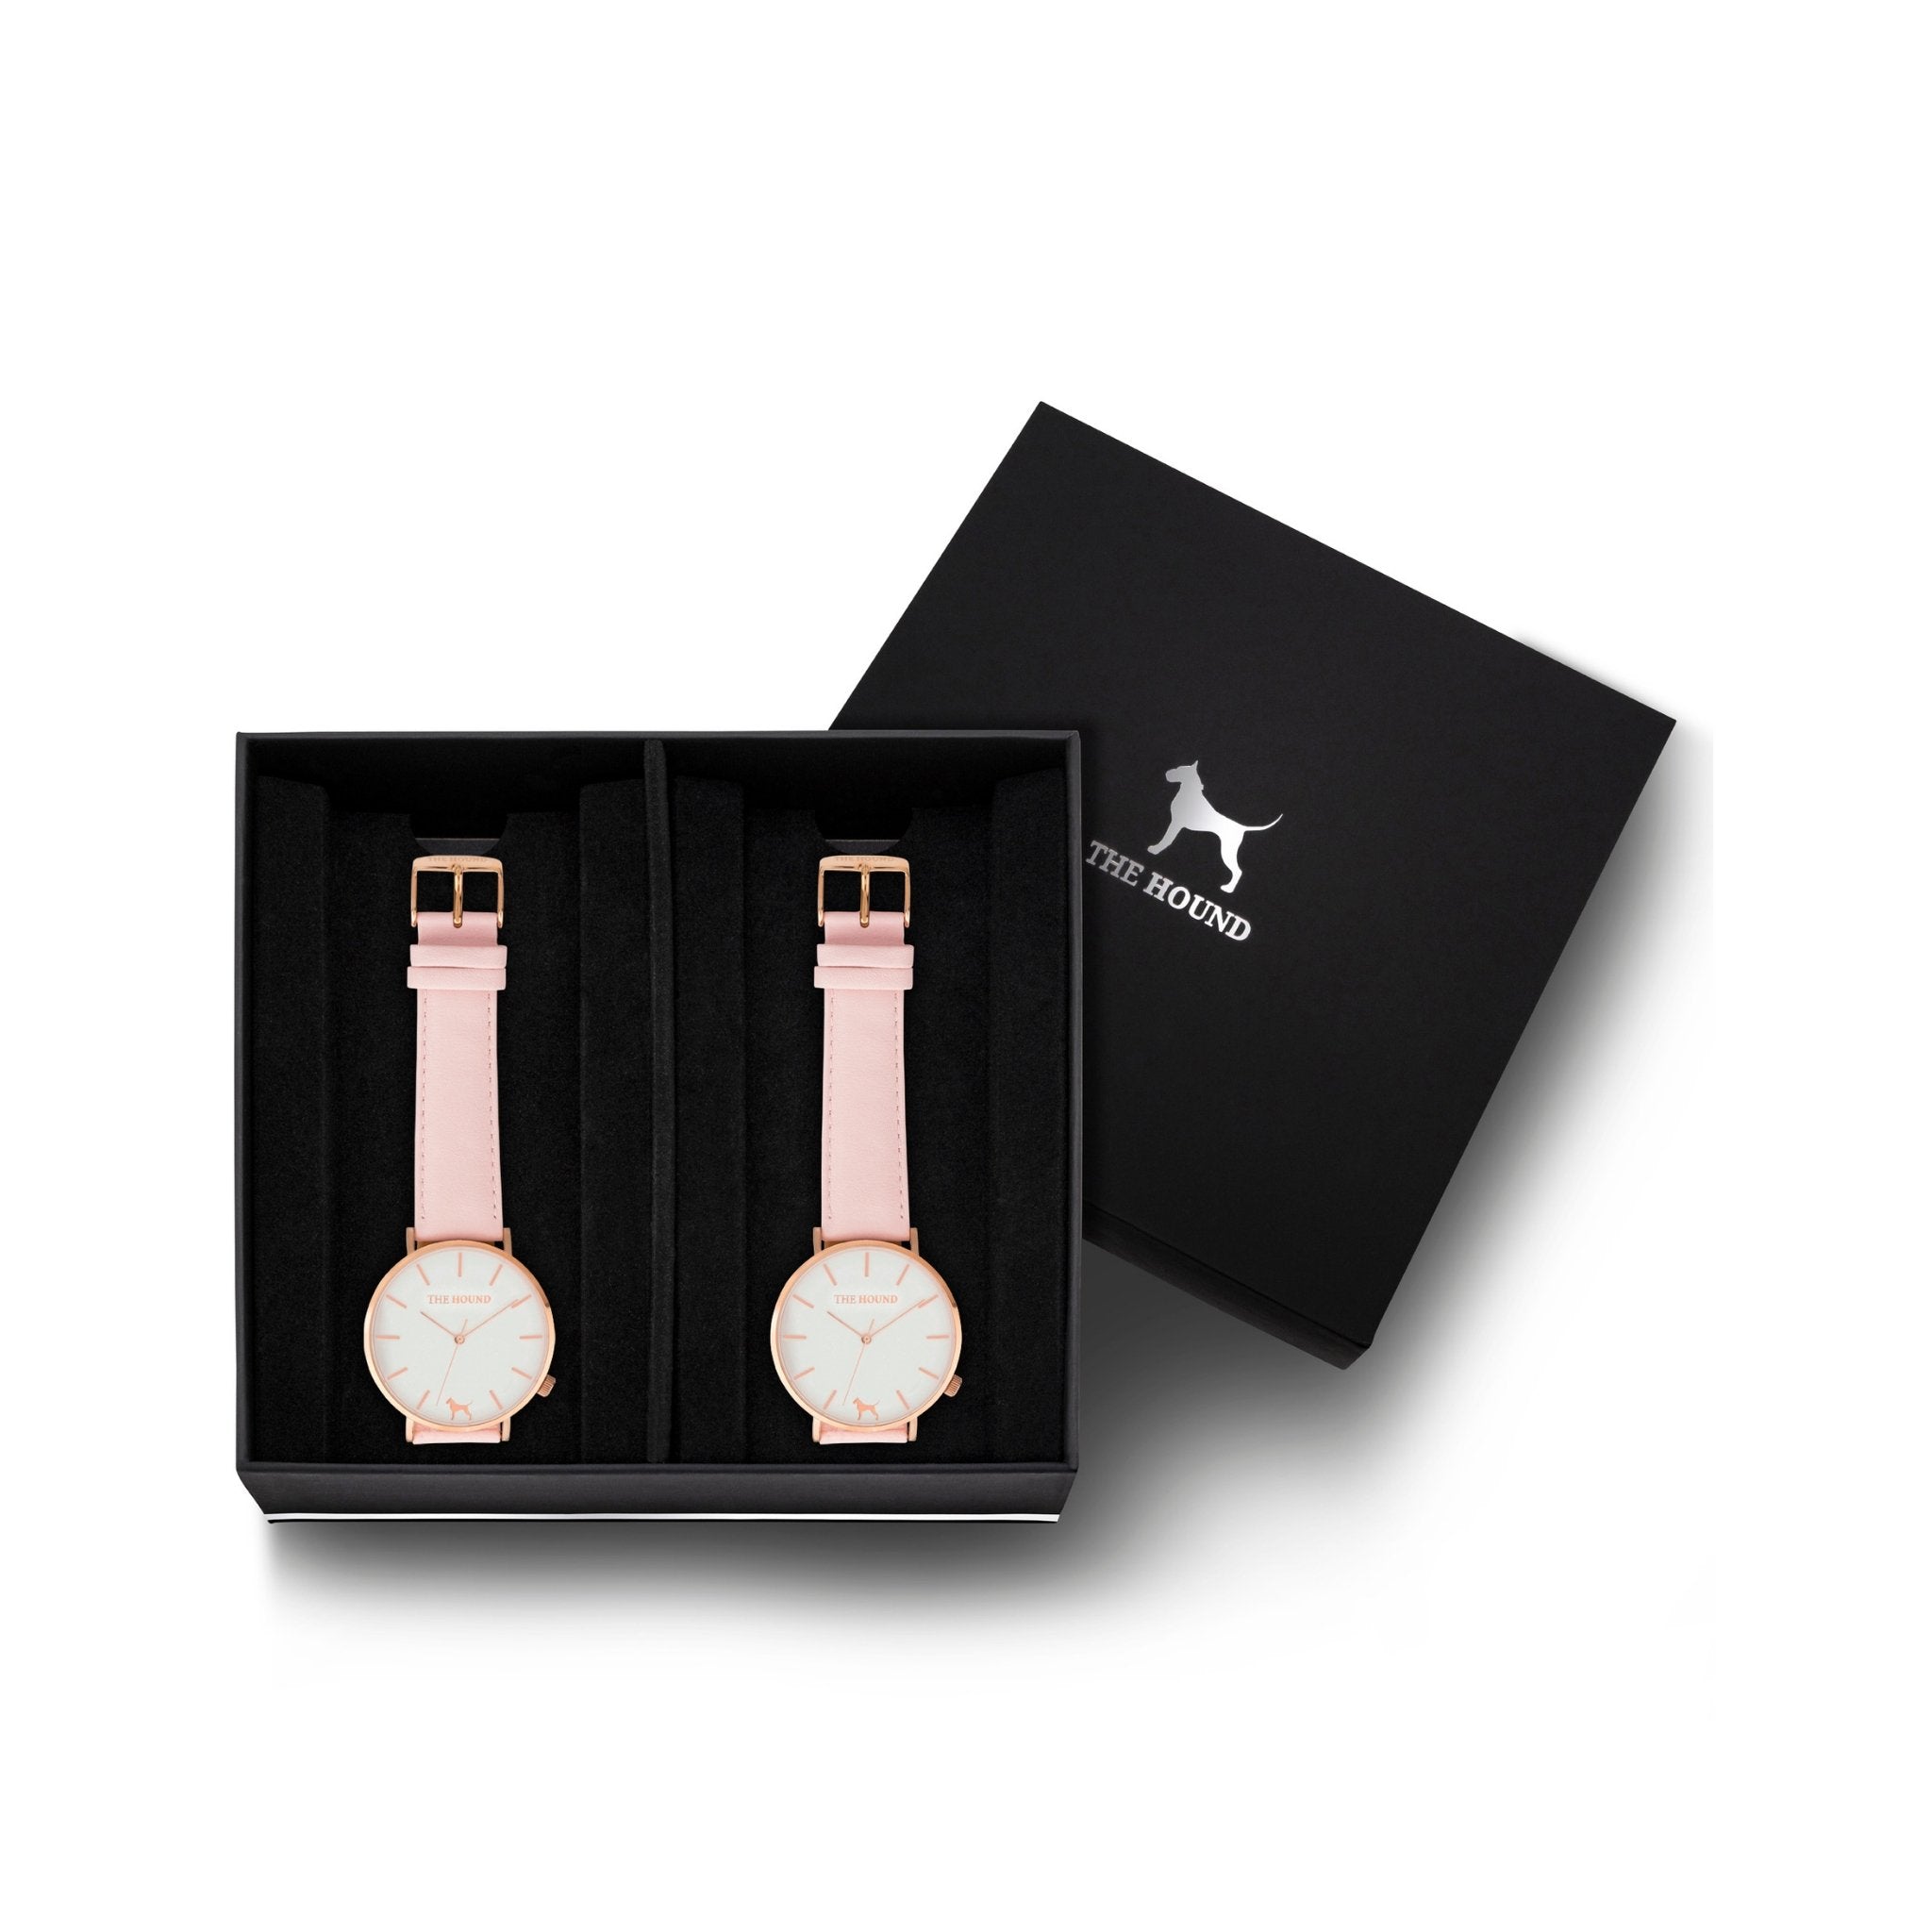 Custom gift set - Rose gold and white watch with stitched blush pink genuine leather band and a rose gold and white watch with stitched blush pink genuine leather band